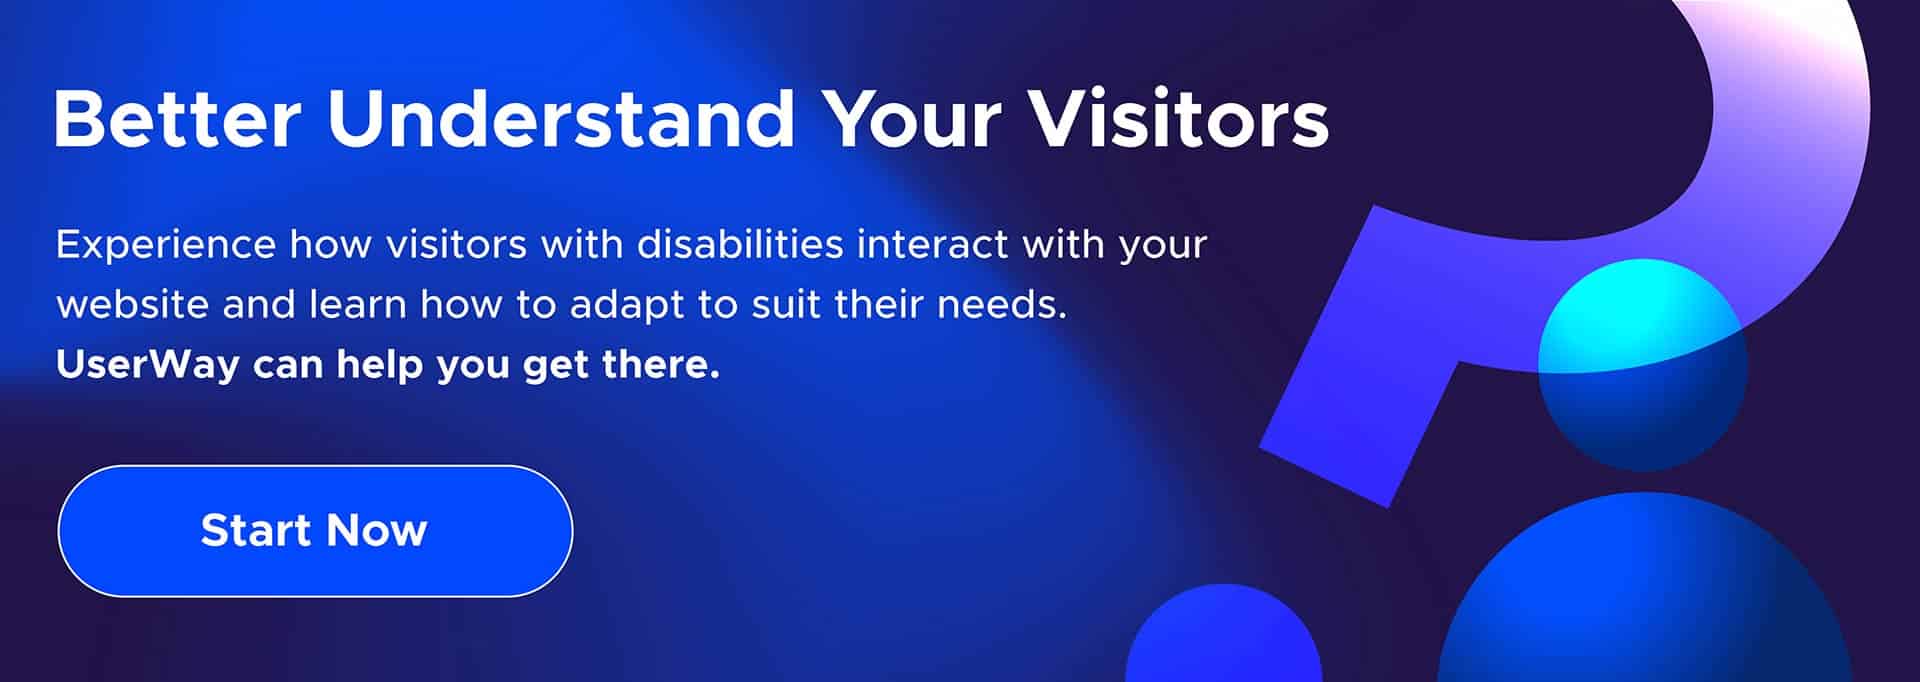 Better understand your visitors 